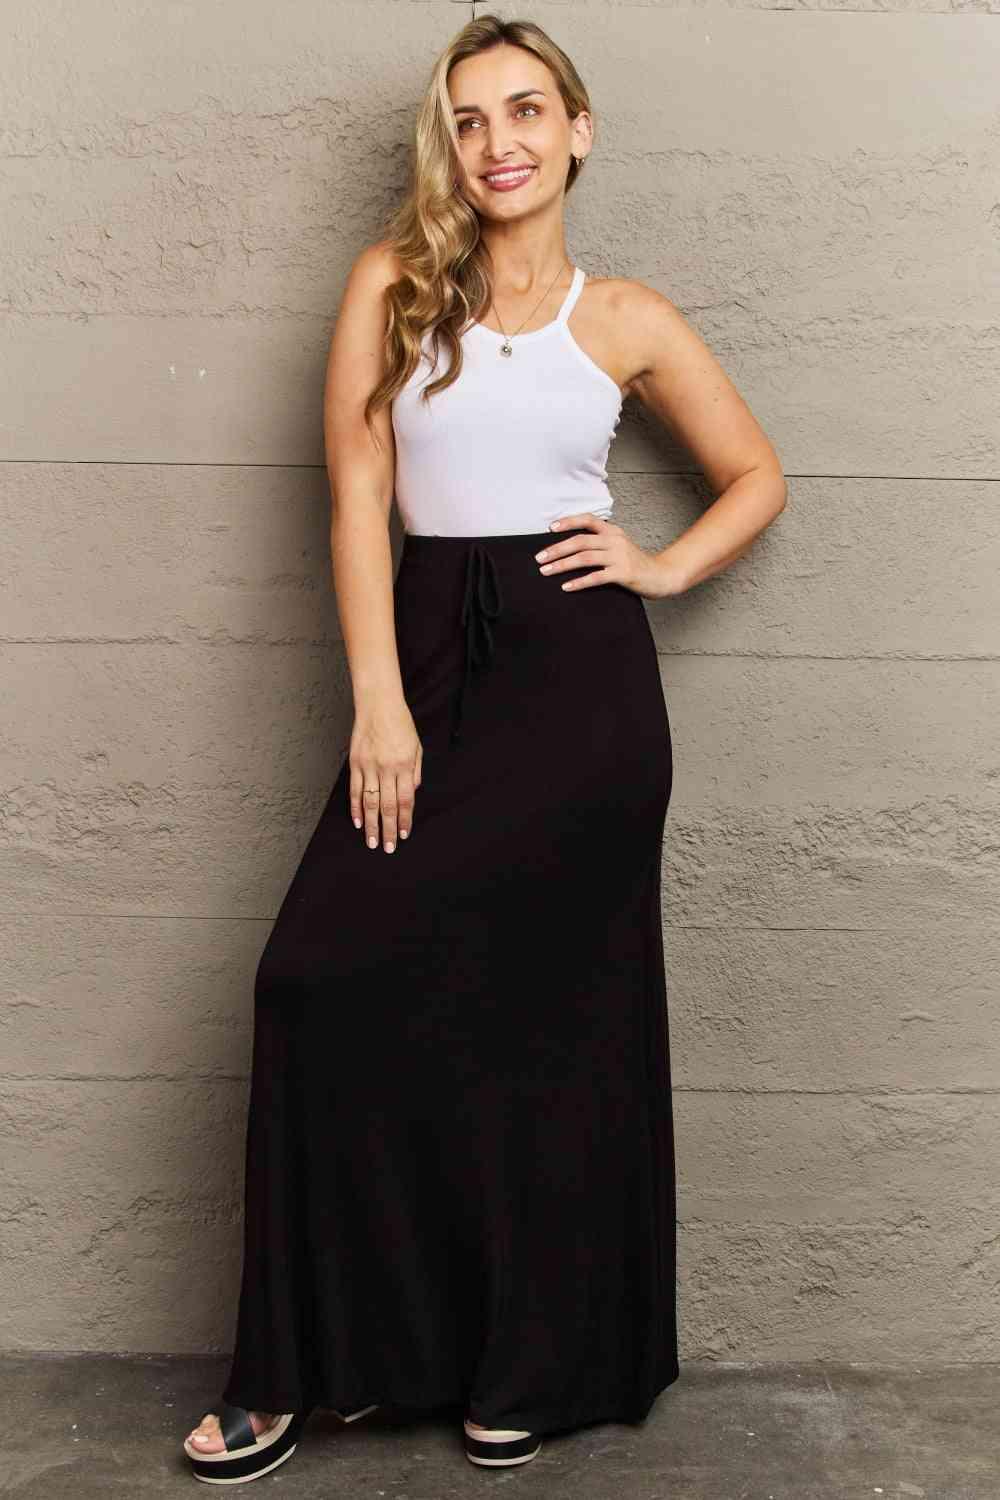 Culture Code For The Day Flare Maxi Skirt in Black - God's Girl Gifts And Apparel